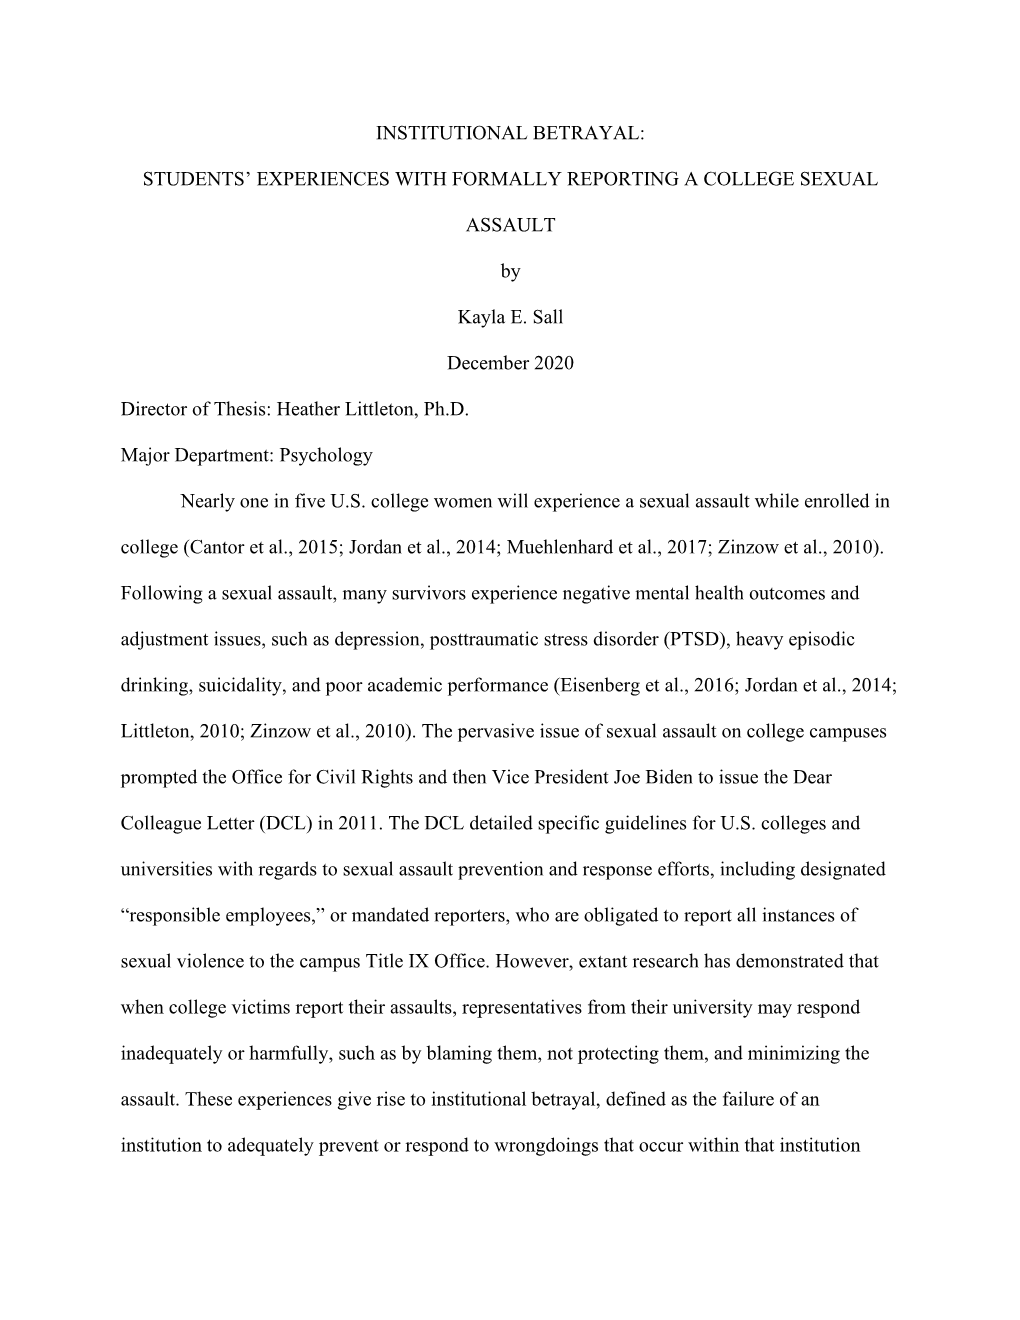 INSTITUTIONAL BETRAYAL: STUDENTS' EXPERIENCES with FORMALLY REPORTING a COLLEGE SEXUAL ASSAULT by Kayla E. Sall December 2020